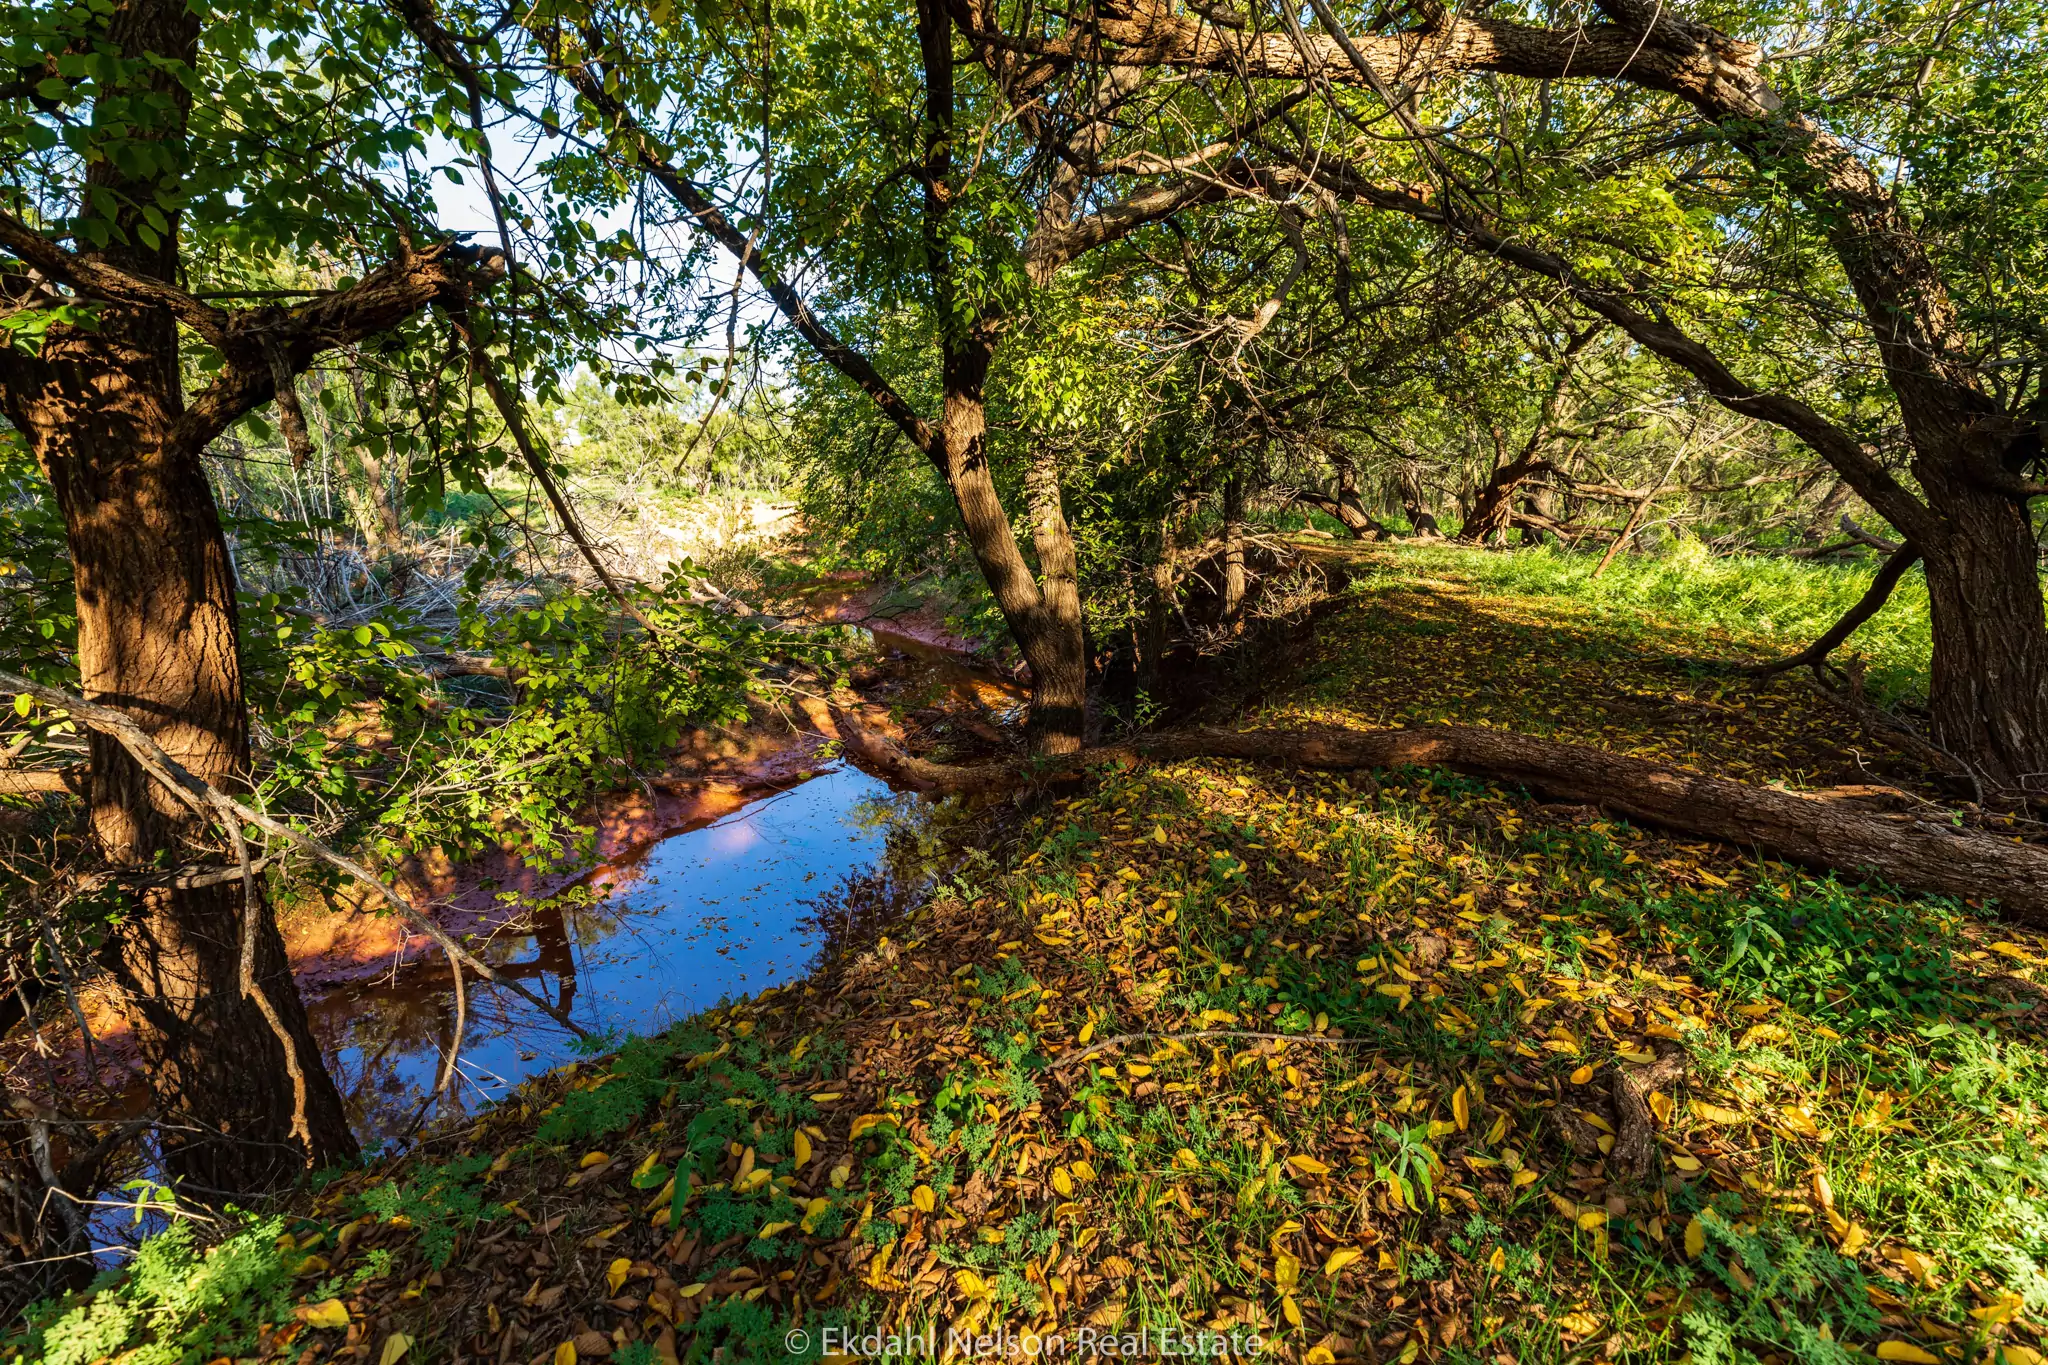 ranch with creek running through it - ranch land for sale abilene - ekdahl nelson real estate